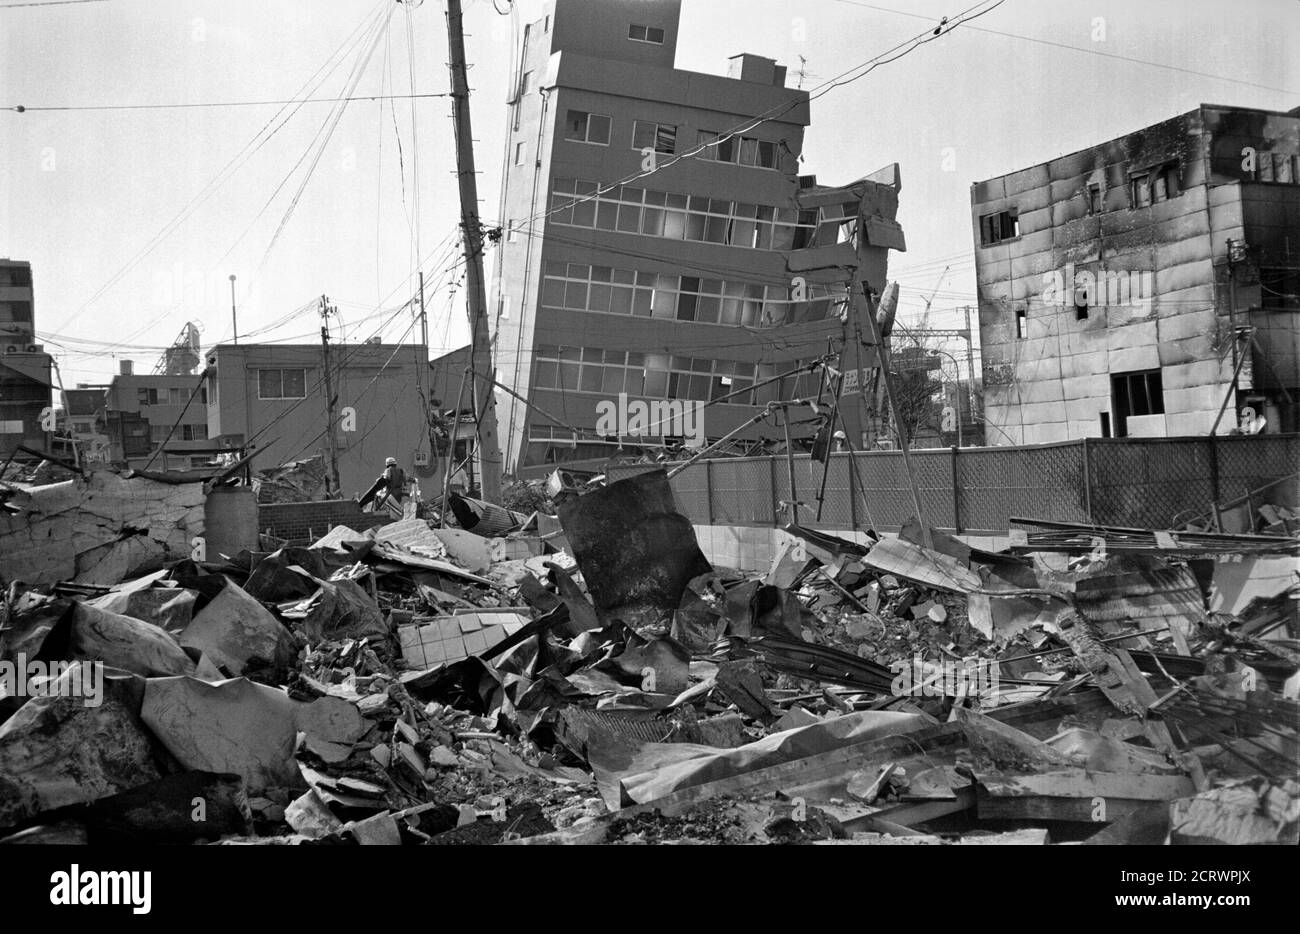 Scene of the ruins in a residential area in the aftermath of the damage caused by the 1995 Great Hanshin Earthquake in Kobe, Japan Stock Photo